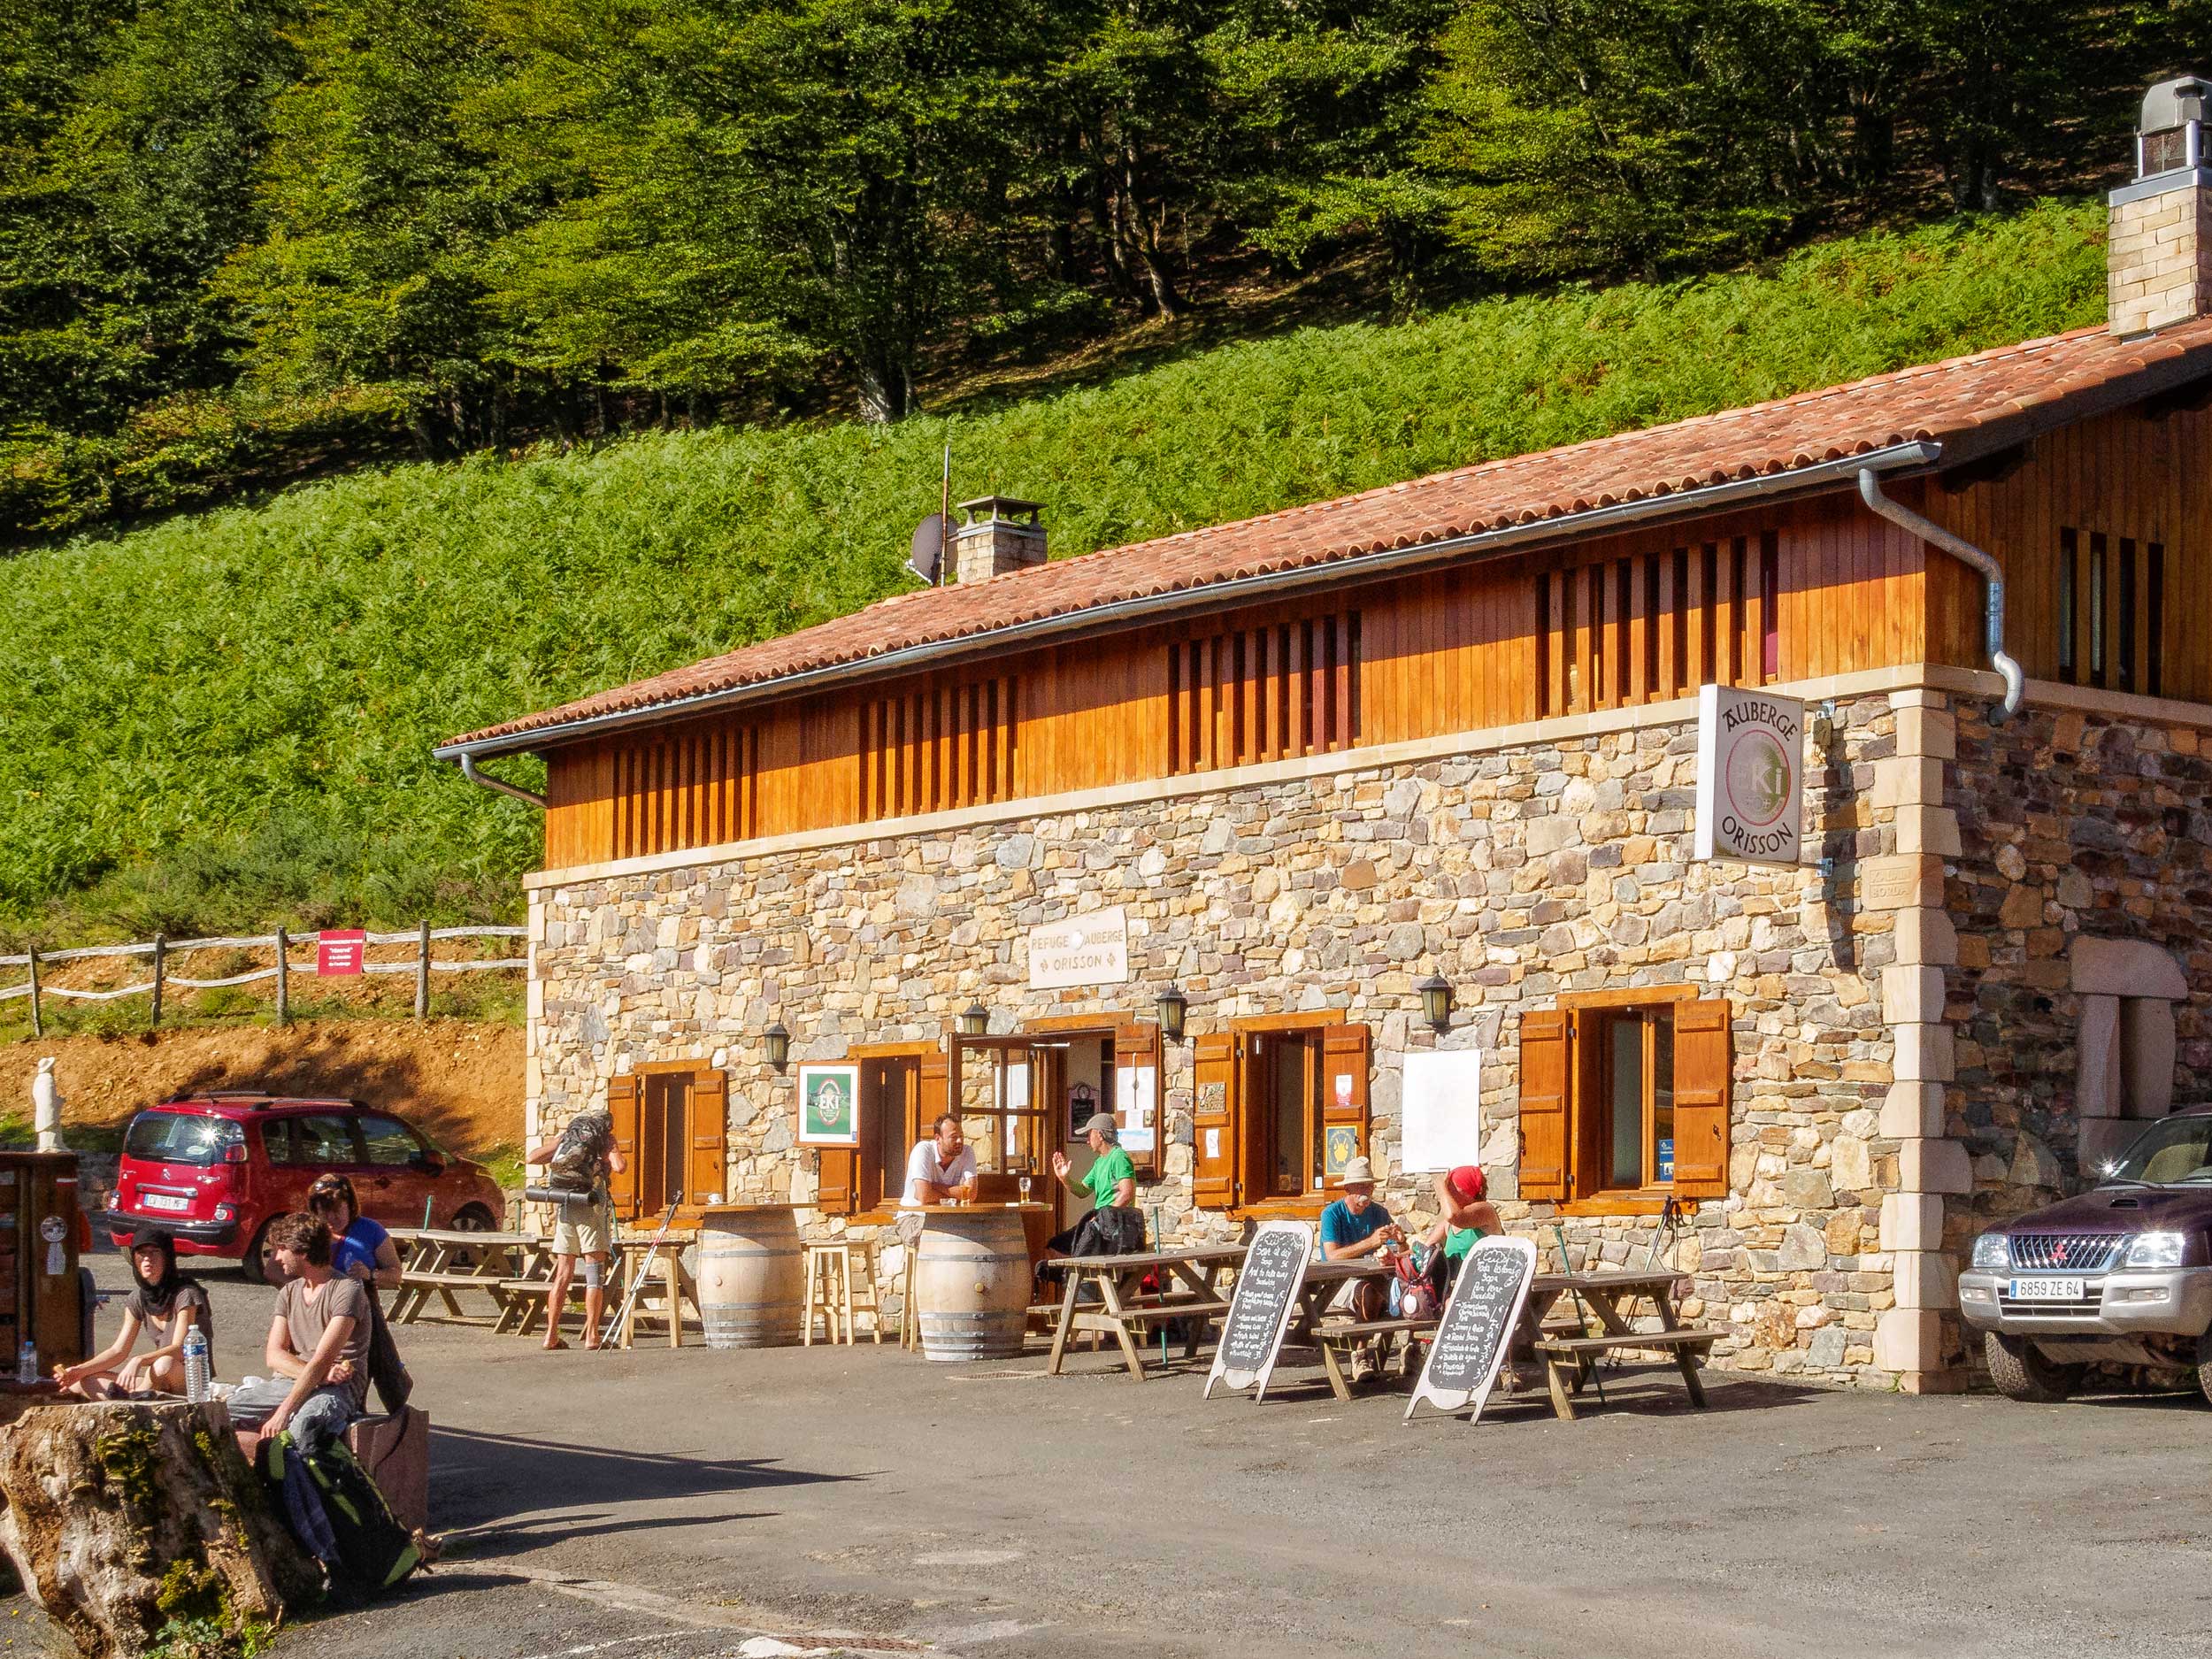 A stone building with people at tables outside, France